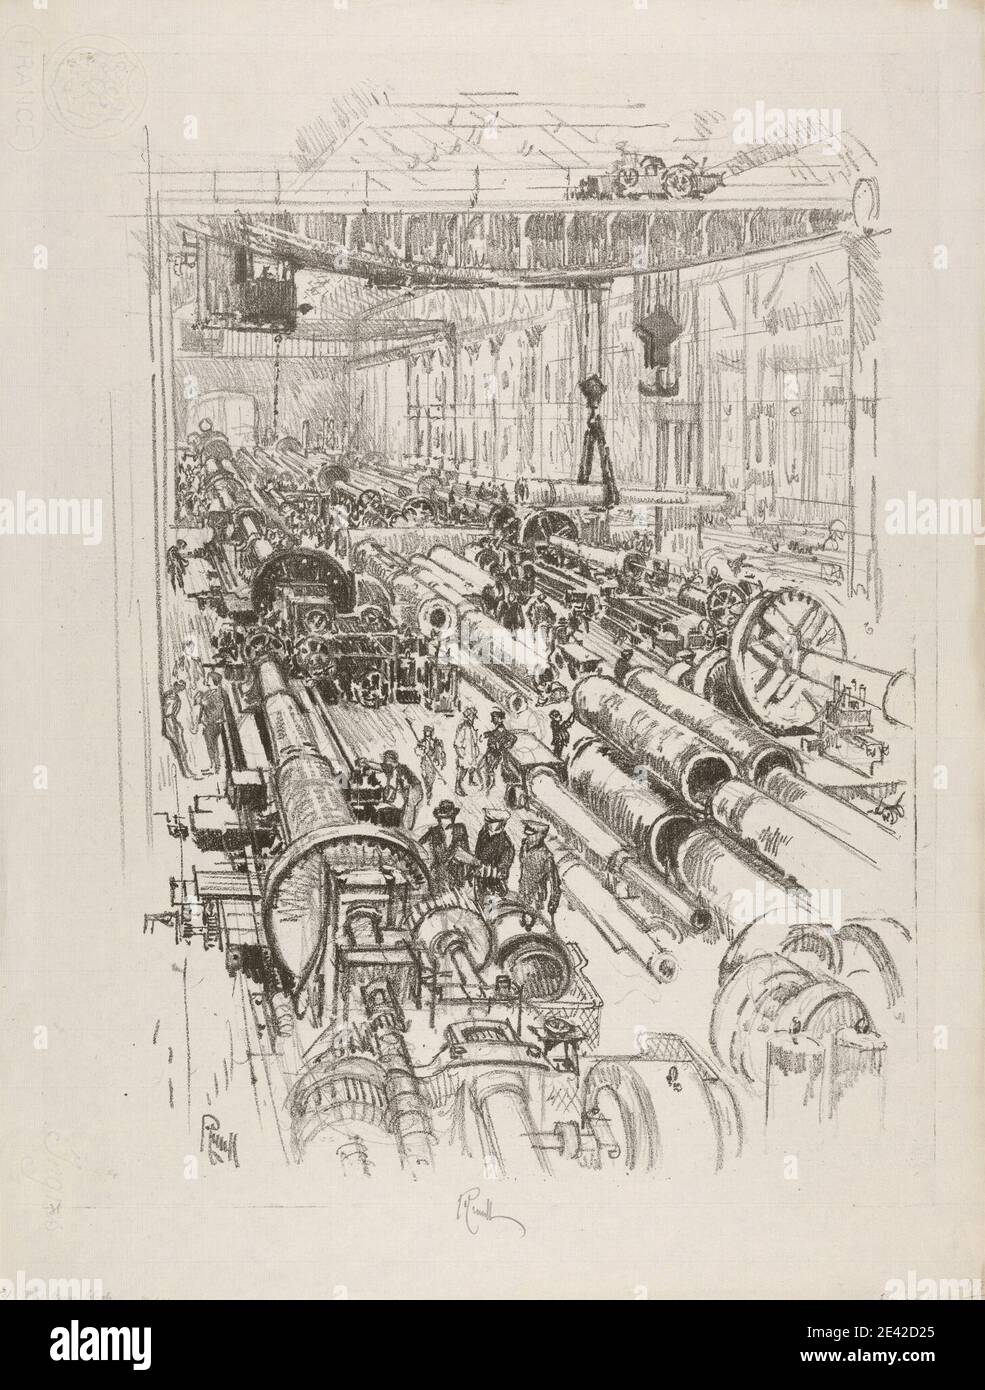 Print made by Joseph Pennell, 1860â€“1926, American, The Gun Shop, 1917. Lithograph on medium, cream, slightly textured laid paper.   cannons (artillery) , factory , genre subject , guns , industry , laborers , men , shop , wars , Weapons and Ammunition , World War, 1914-1918 Stock Photo